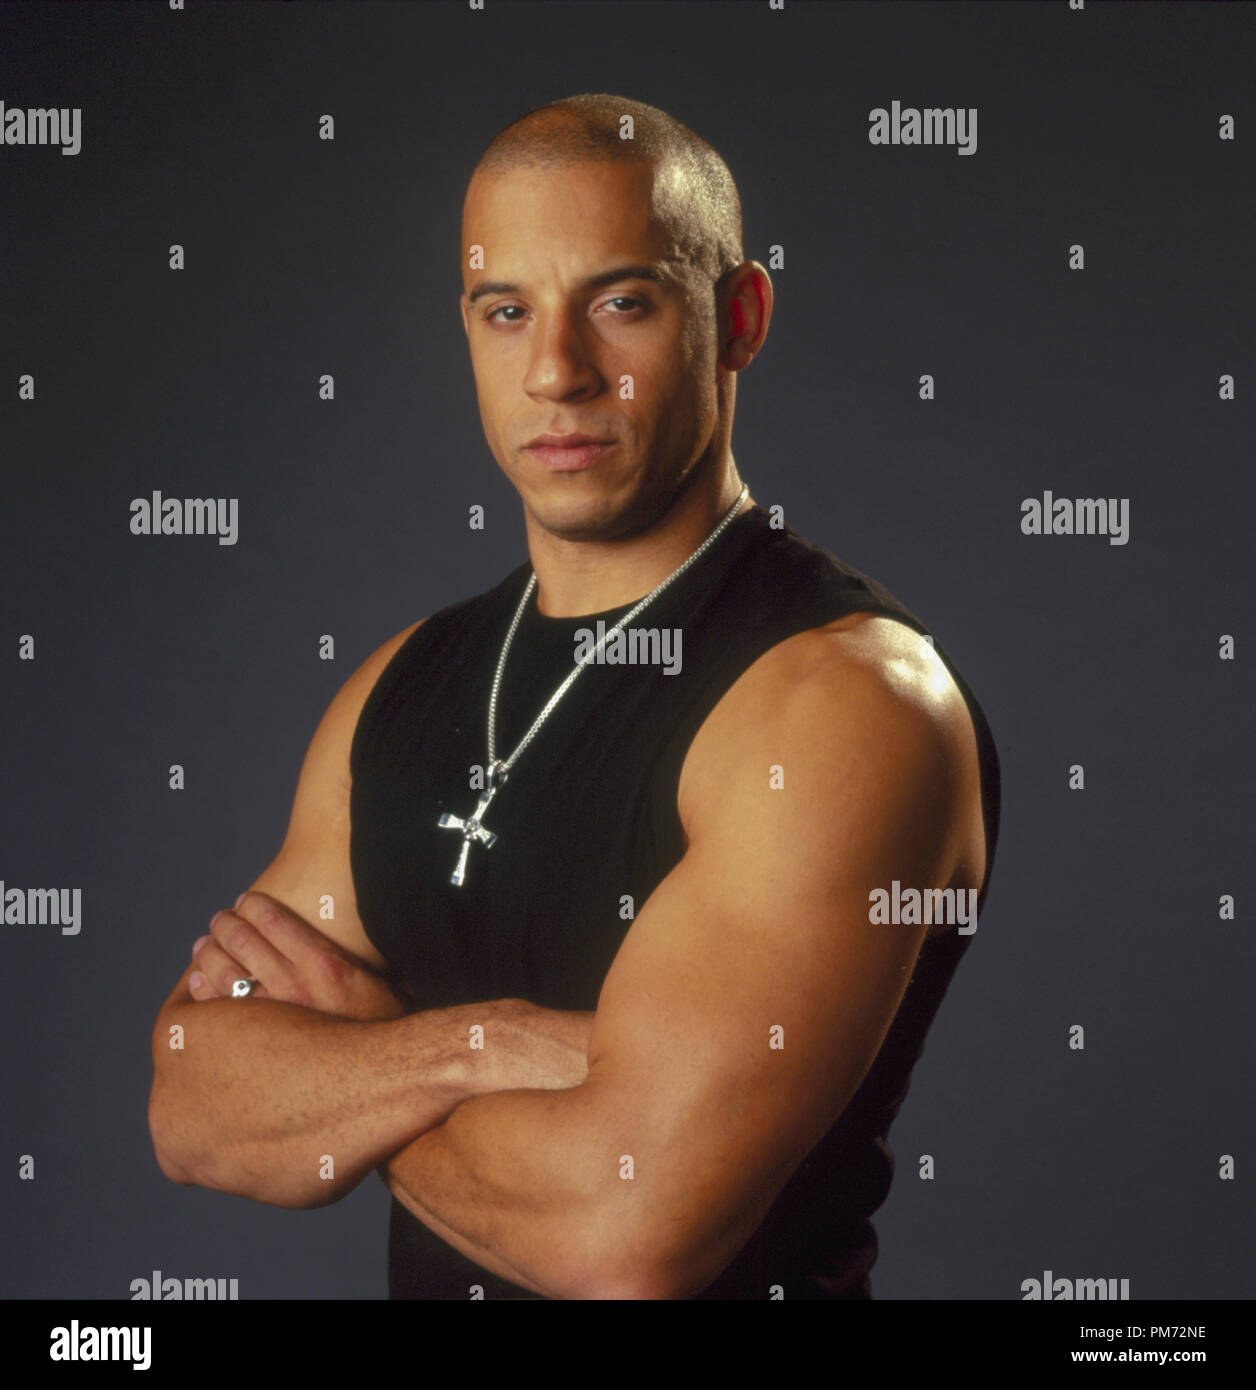 Film Still / Publicity Still from "Fast and The Furious" Vin Diesel © 2001  Universal Photo credit: Bob Marshak/ File Reference # 308471117THA For  Editorial Use Only - All Rights Reserved Stock Photo - Alamy